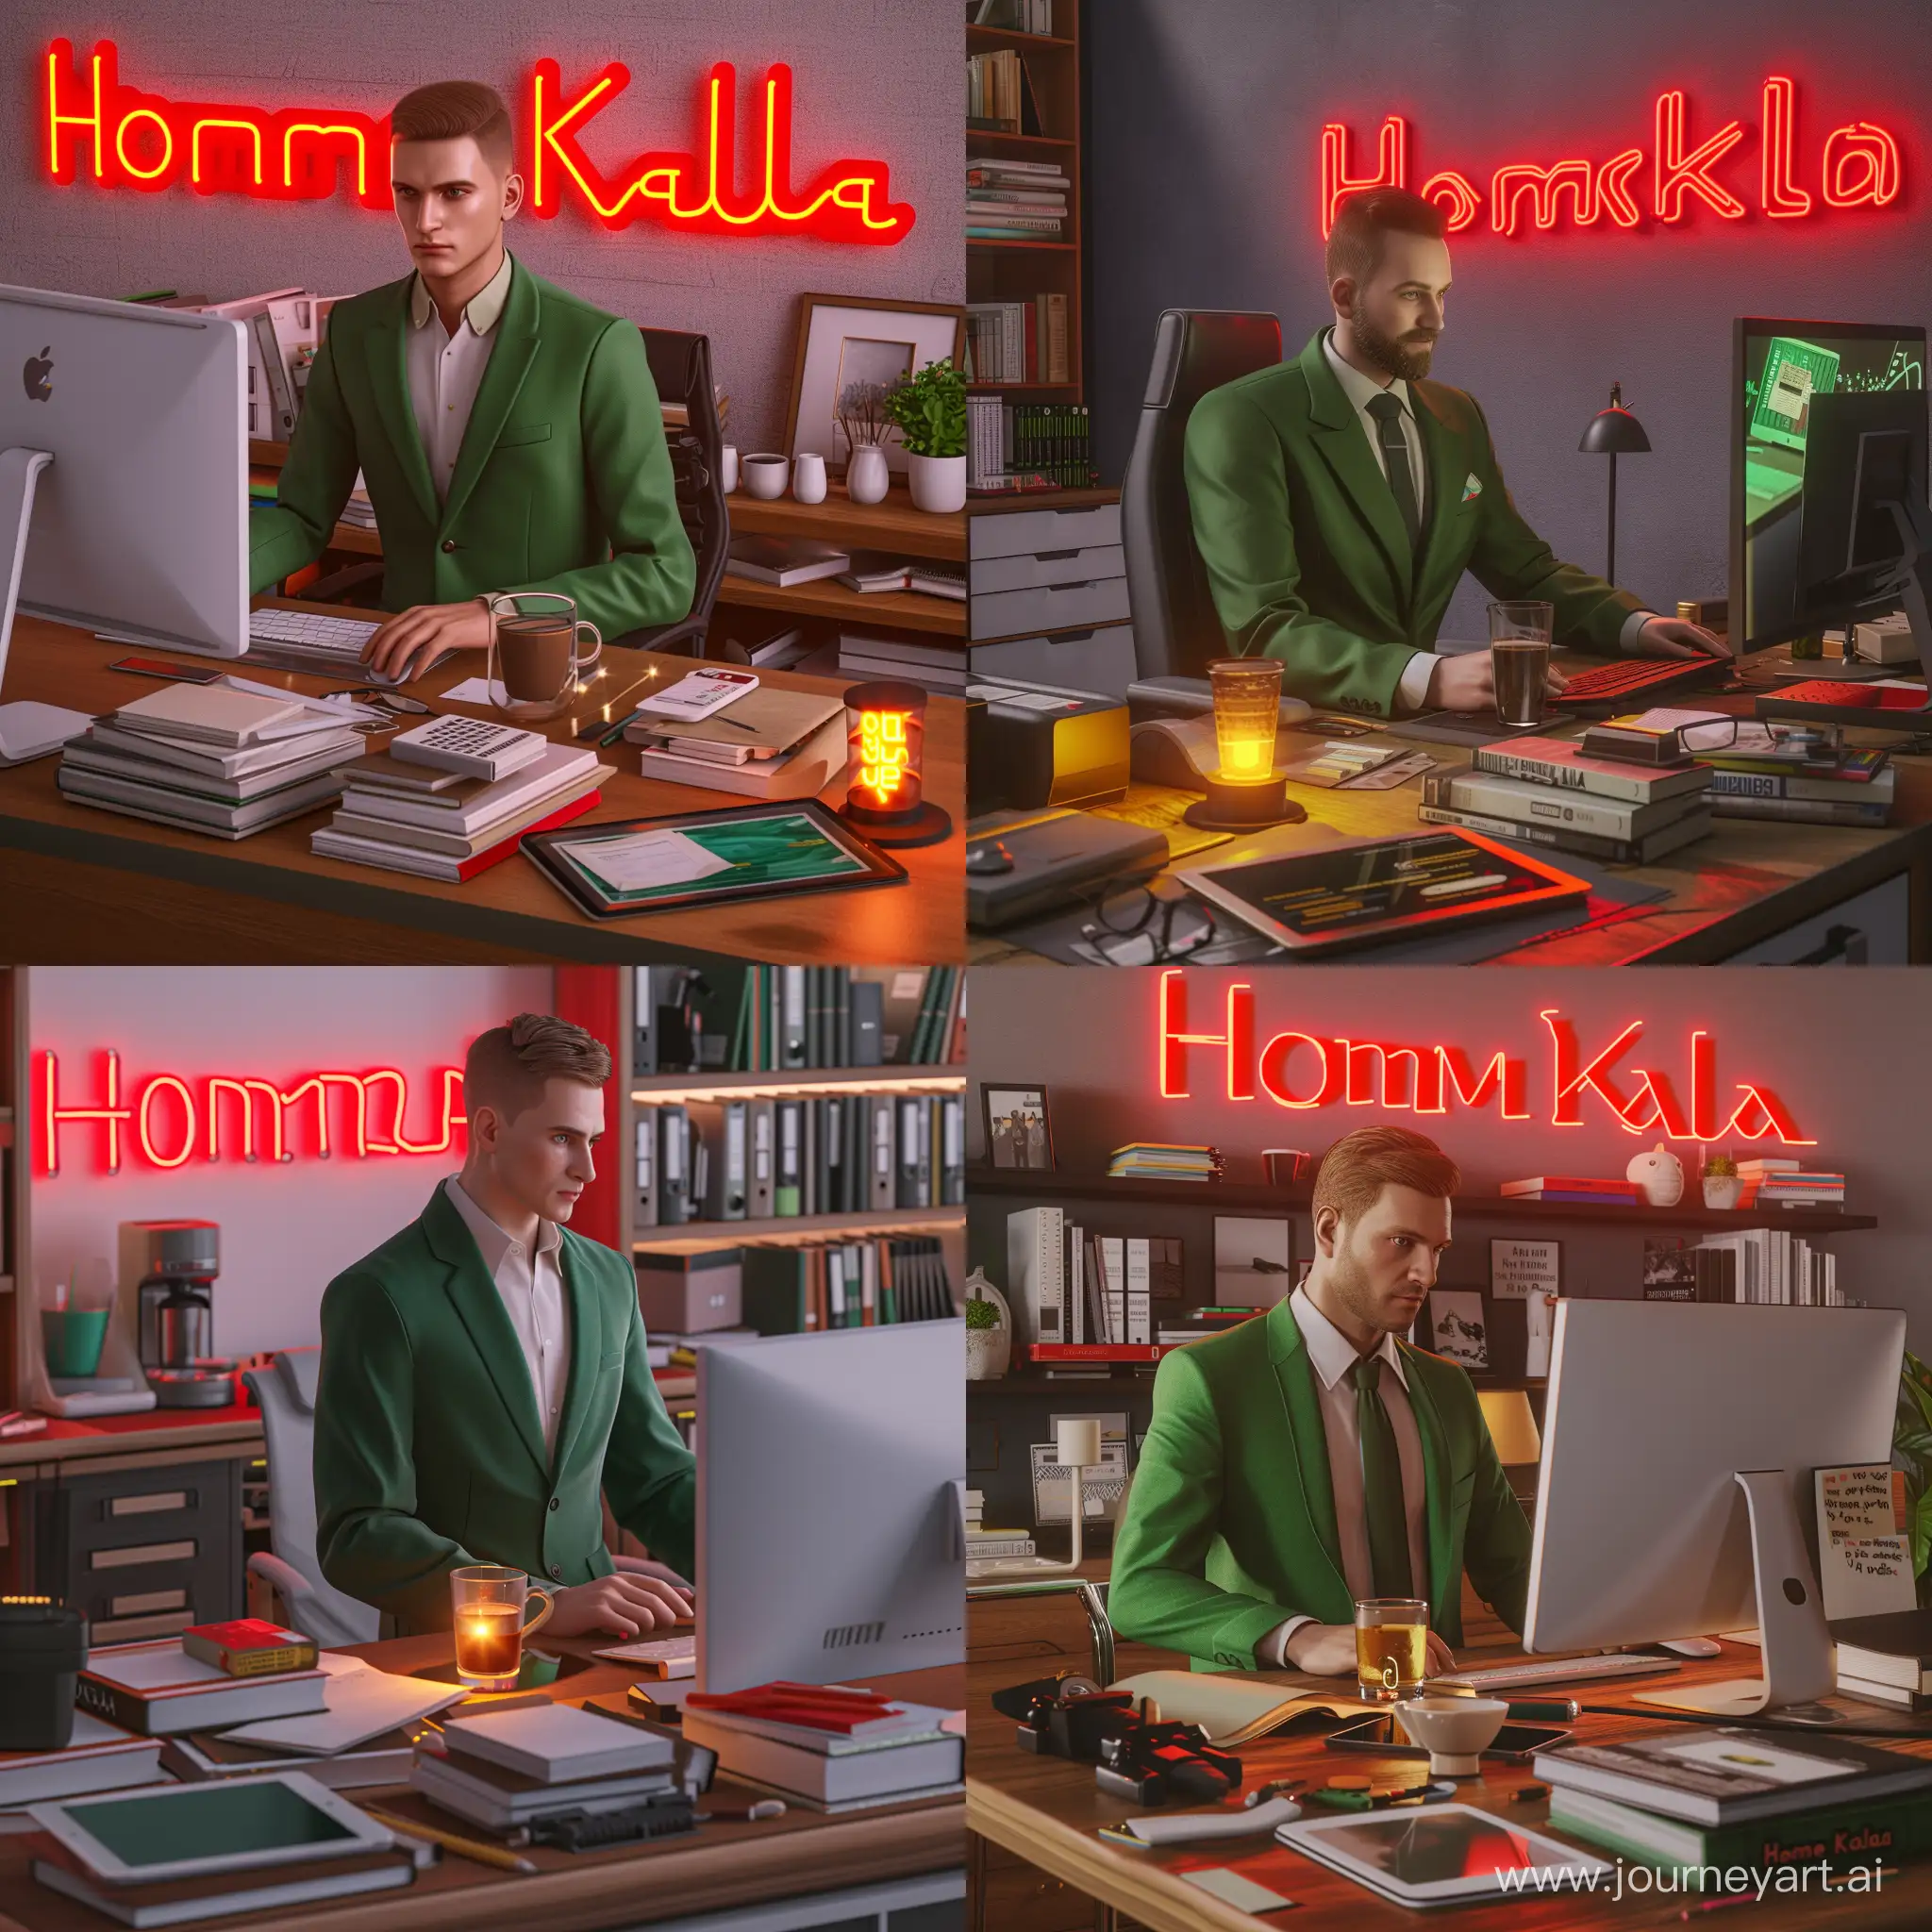 Hyper realistic 3d HD image of a workspace, there is a handsome man in a green suit working in front of a computer screen, there is a glass of coffee, there are office equipment on the work desk, there is a lit tablet next to a pile of books, the words "HomeKala" on the wall with red neon effect